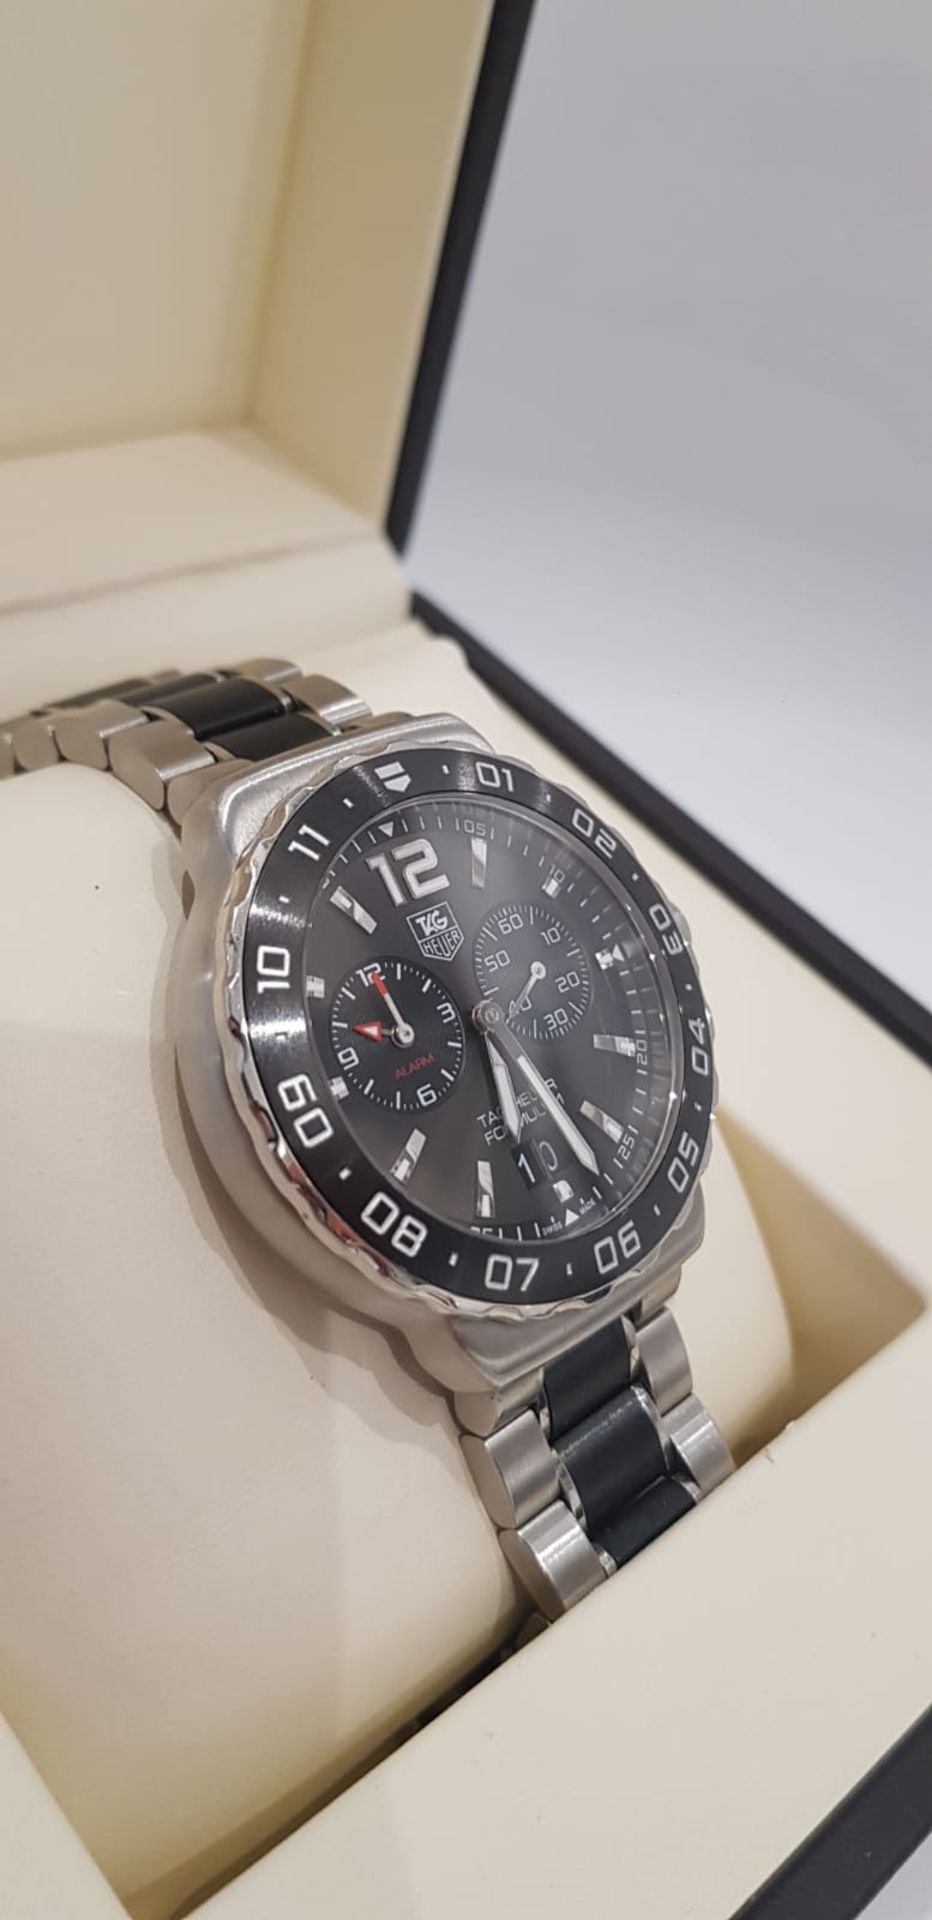 TAG HEUER GENTS CHRONOGRAPH WATCH 42MM, FORMULA 1, BOX, GUARANTEE CARD & BOOKLET, STUNNING WATCH - Image 4 of 8